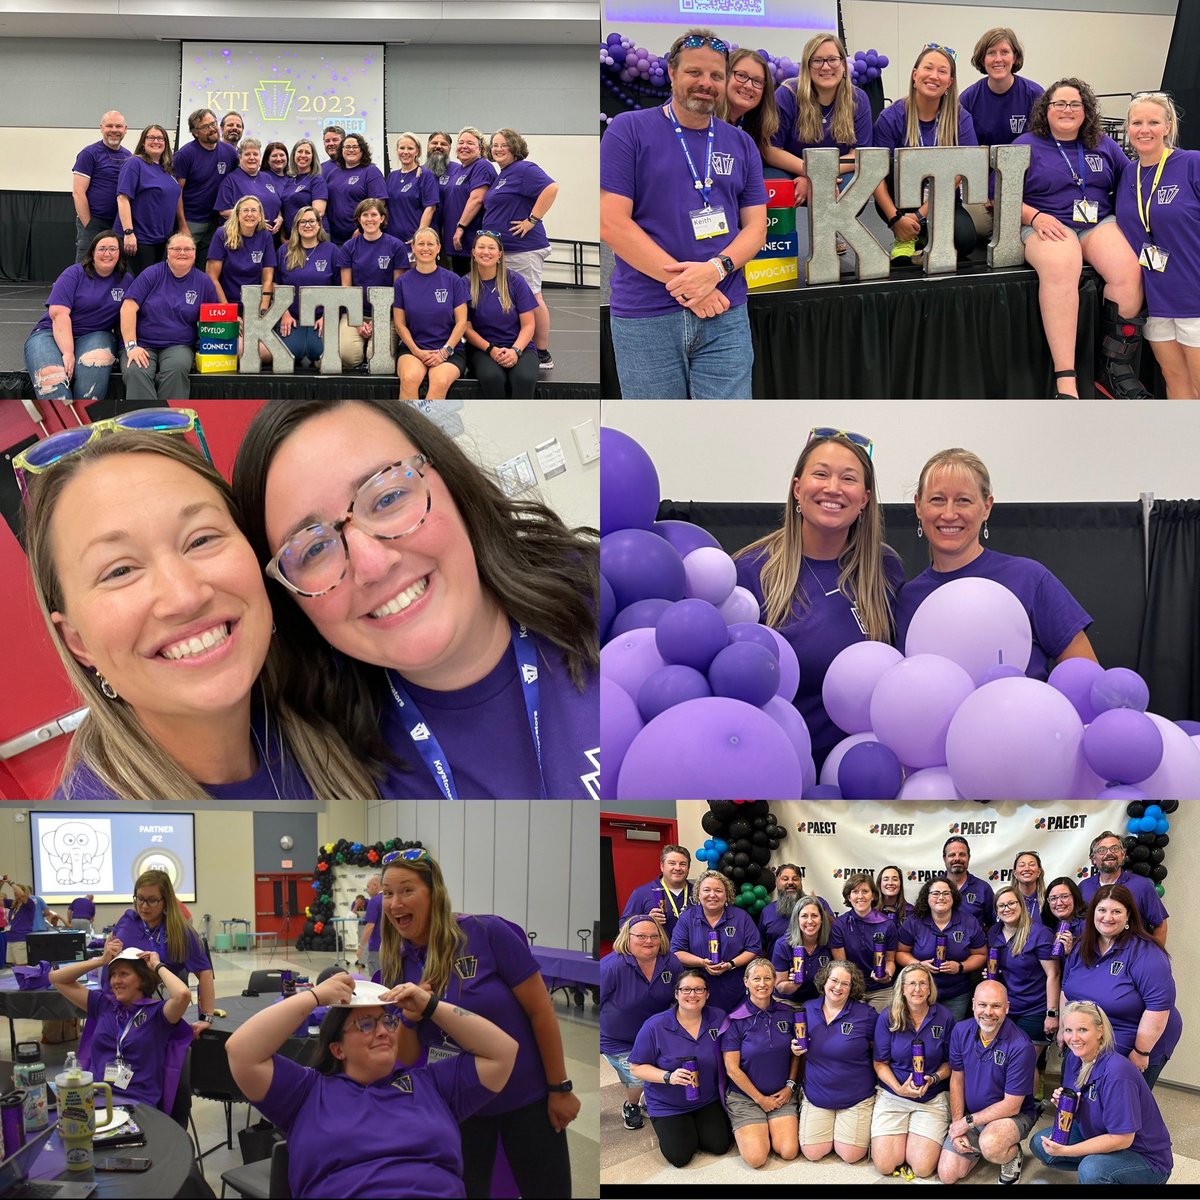 What a week. After attending KTI last year, I knew I wanted a week like that again. To be chosen to come back this year as a lead learner was better & more rewarding than I could have ever imagined. I love my purple family 💜⭐️ #KTISummit #KTIFamily